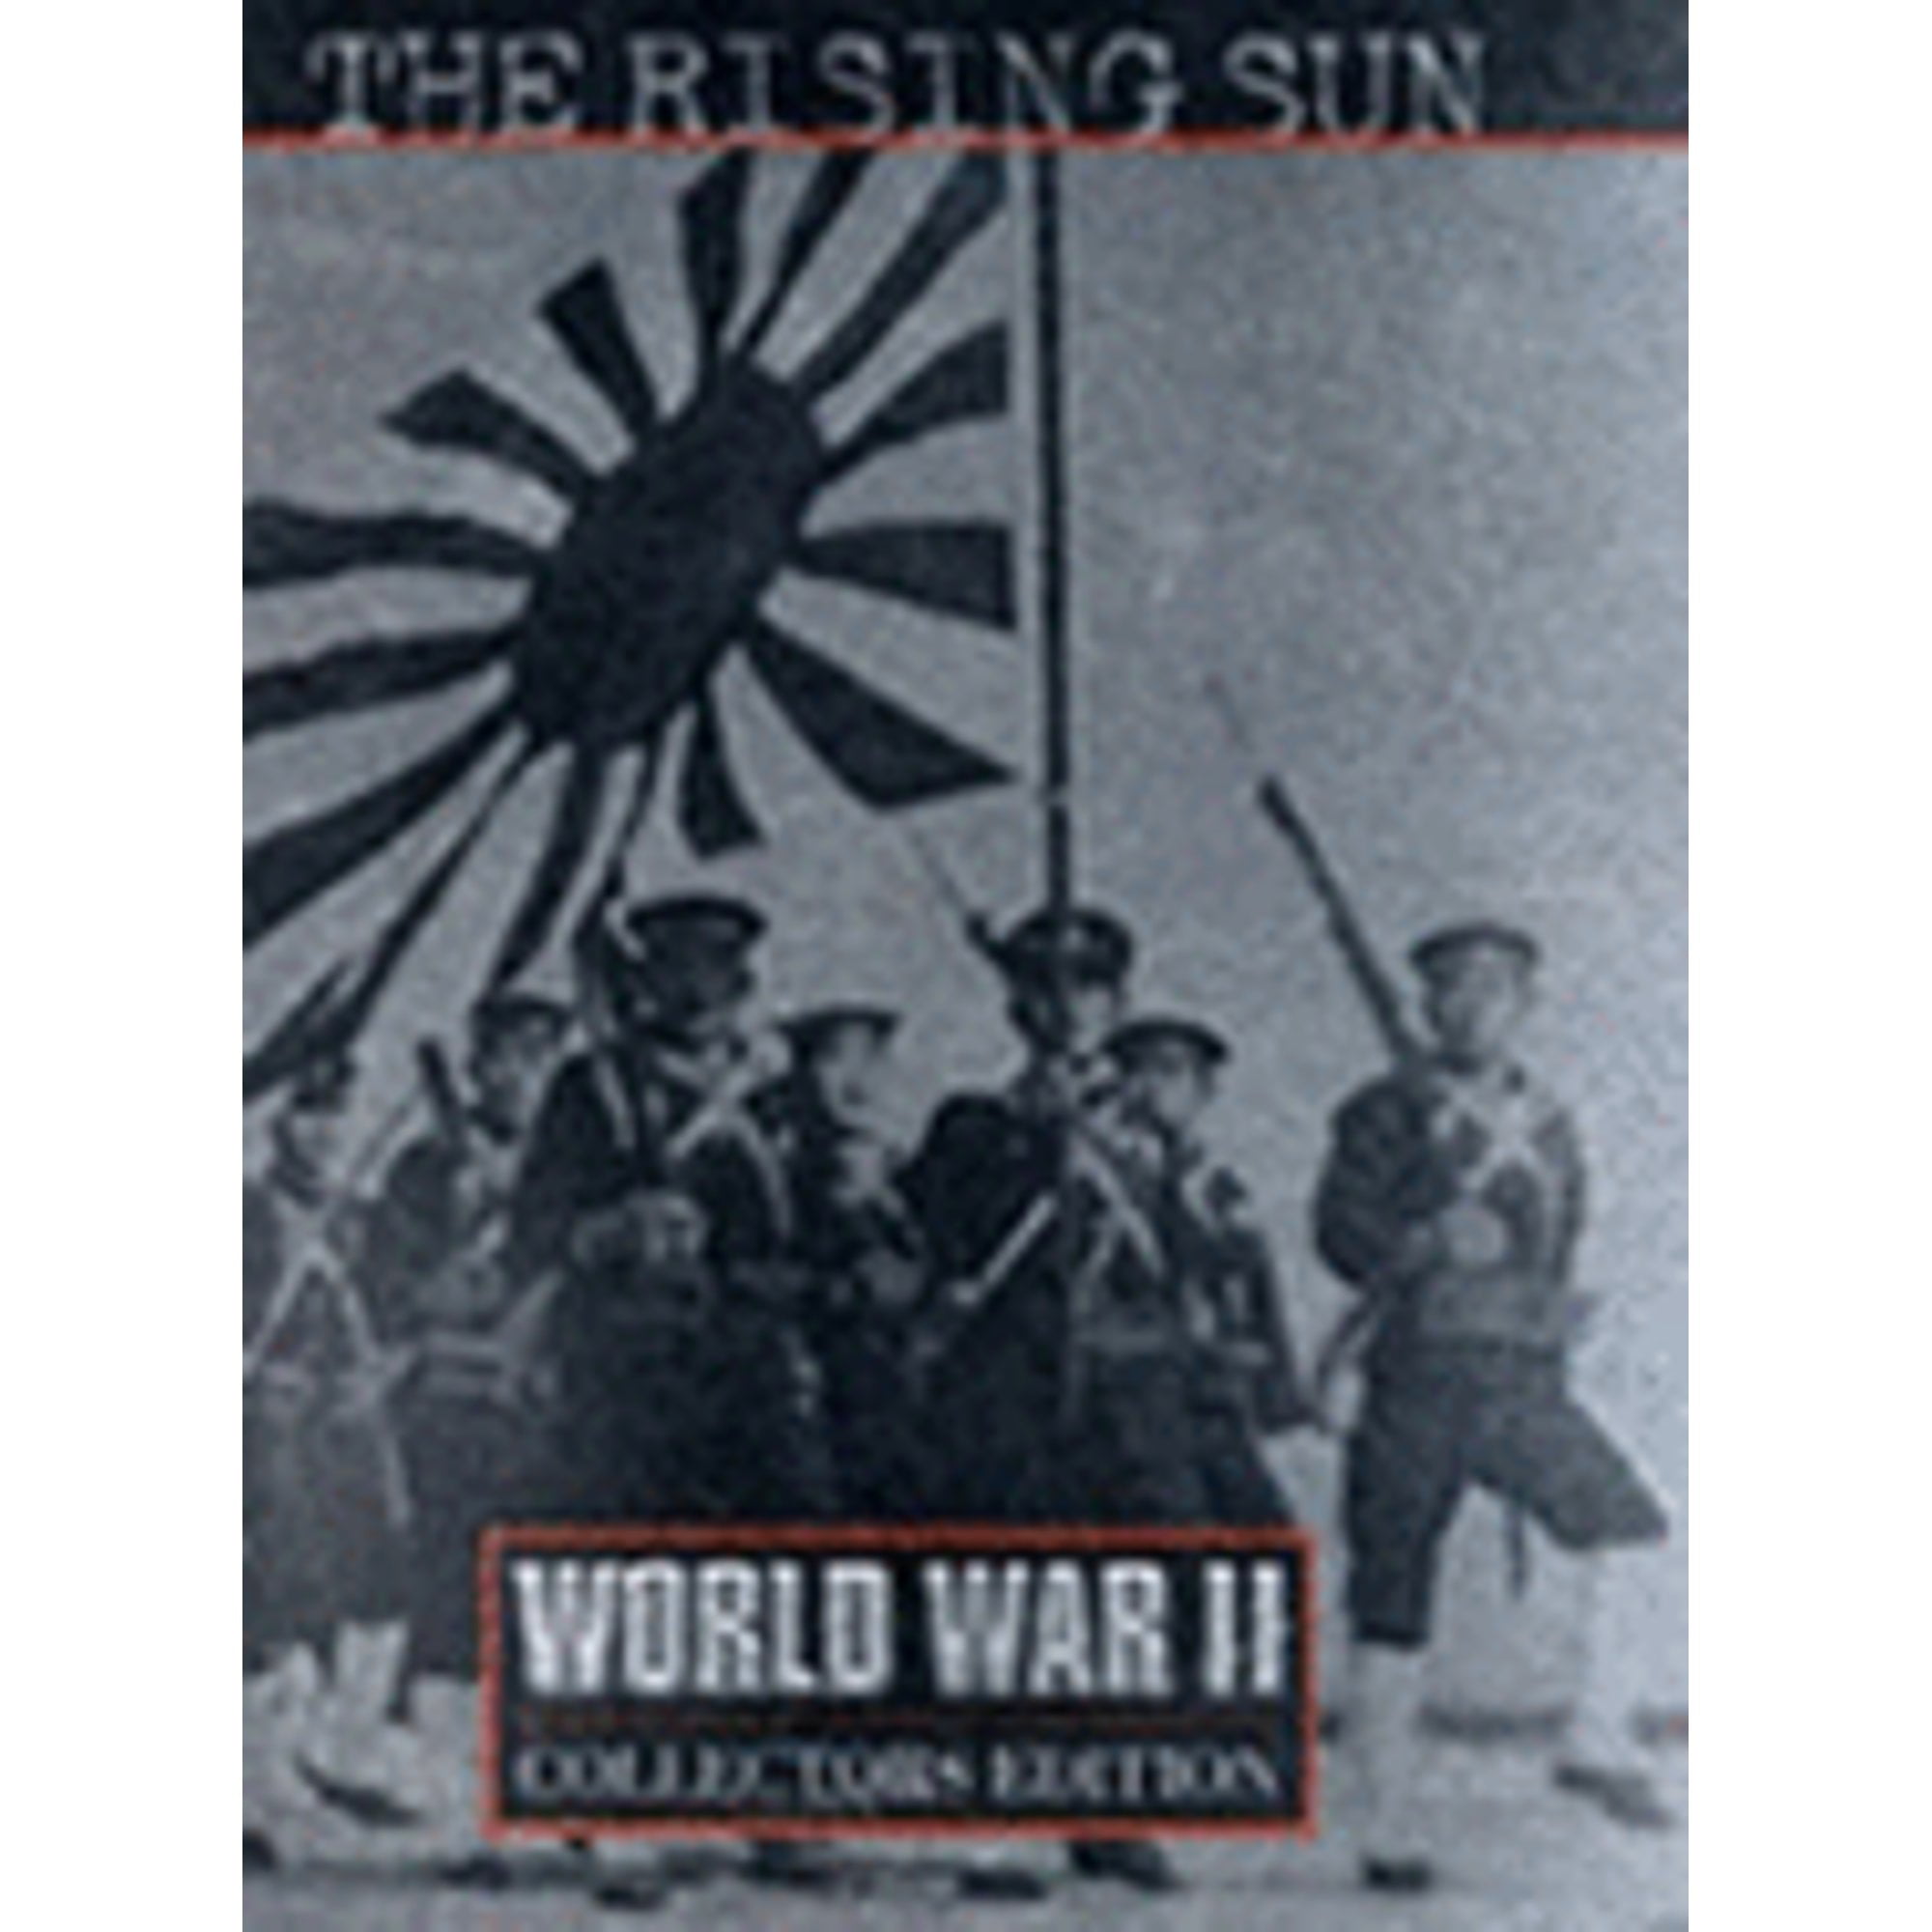 Rising Sun, the World War II (Hardcover) by Time-Life Books